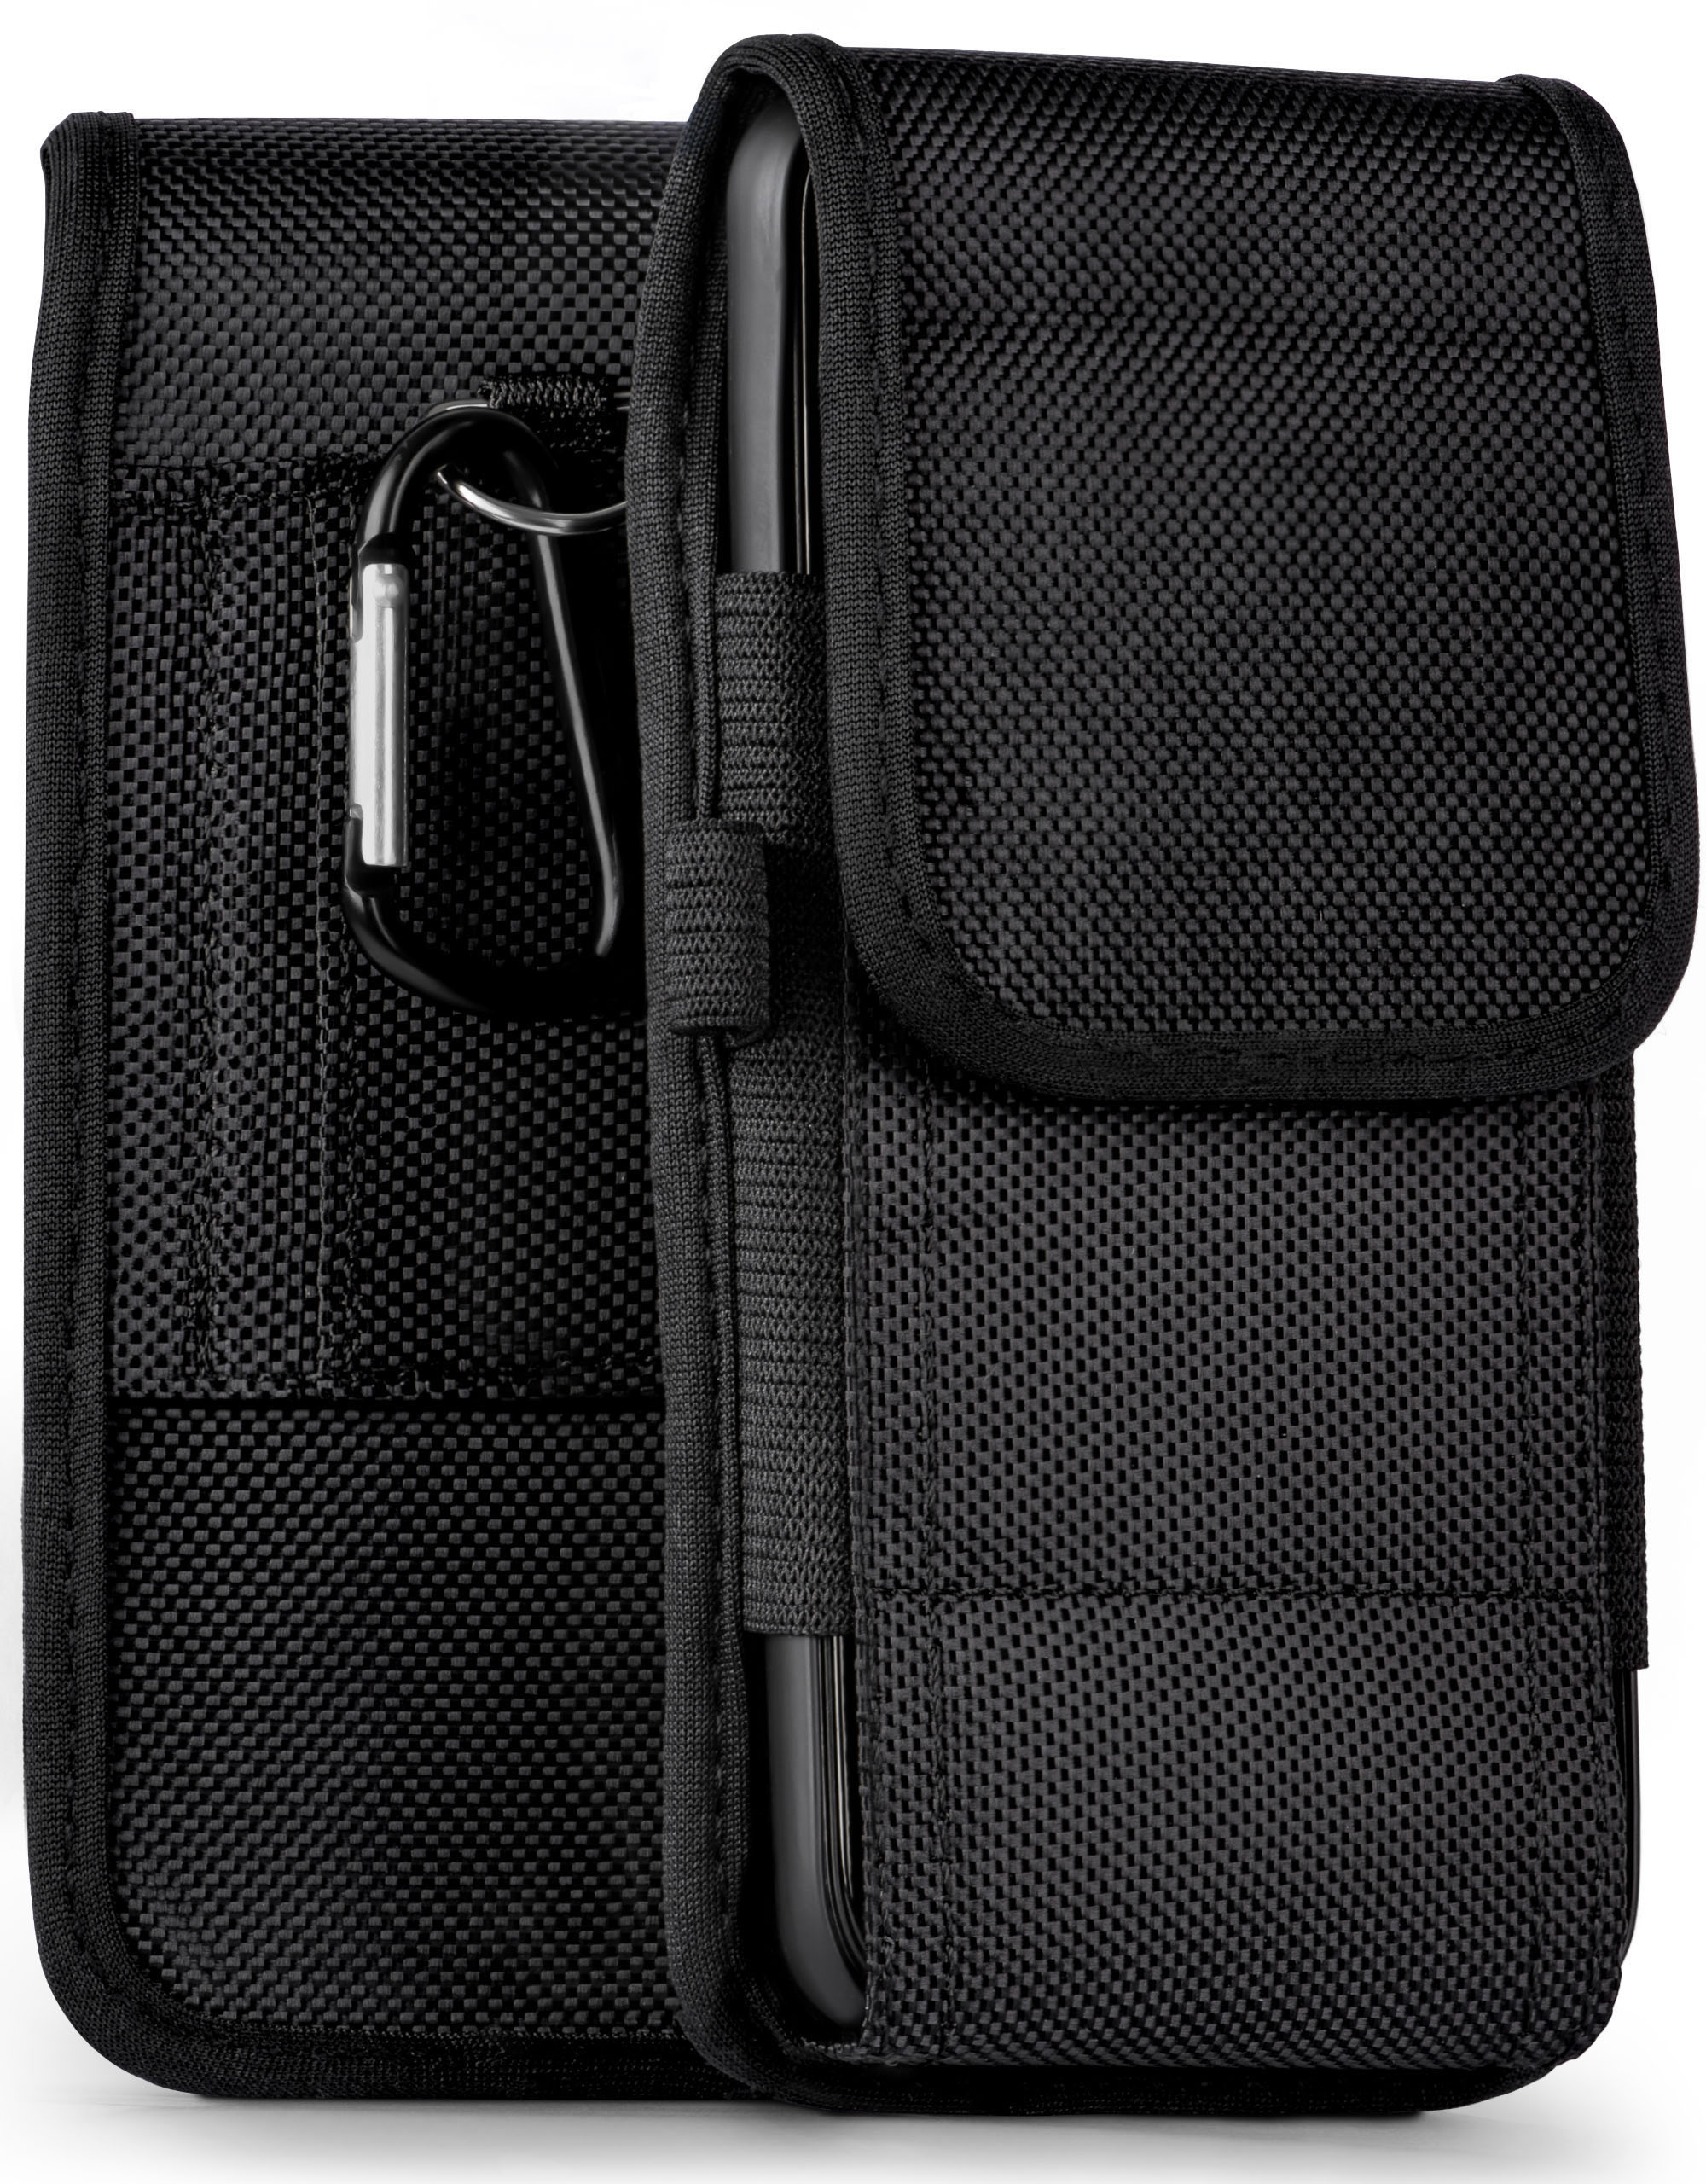 Compact, Trail MOEX Sony, Xperia Agility Case, Holster, Z5